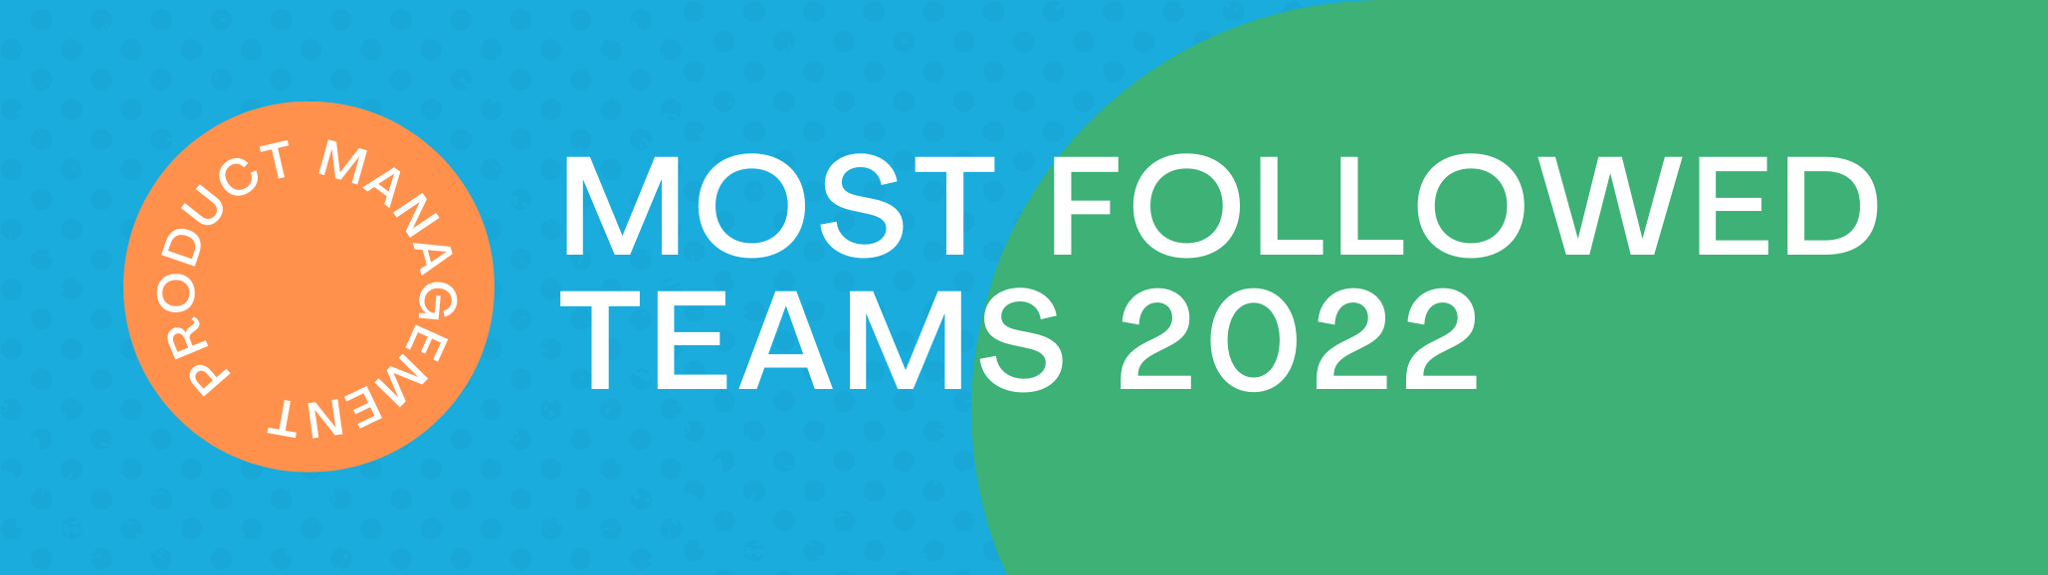 Most Followed Product Management Teams - 2022
The Top 25 Teams To Learn From And Work For To Develop Your Product Management Career